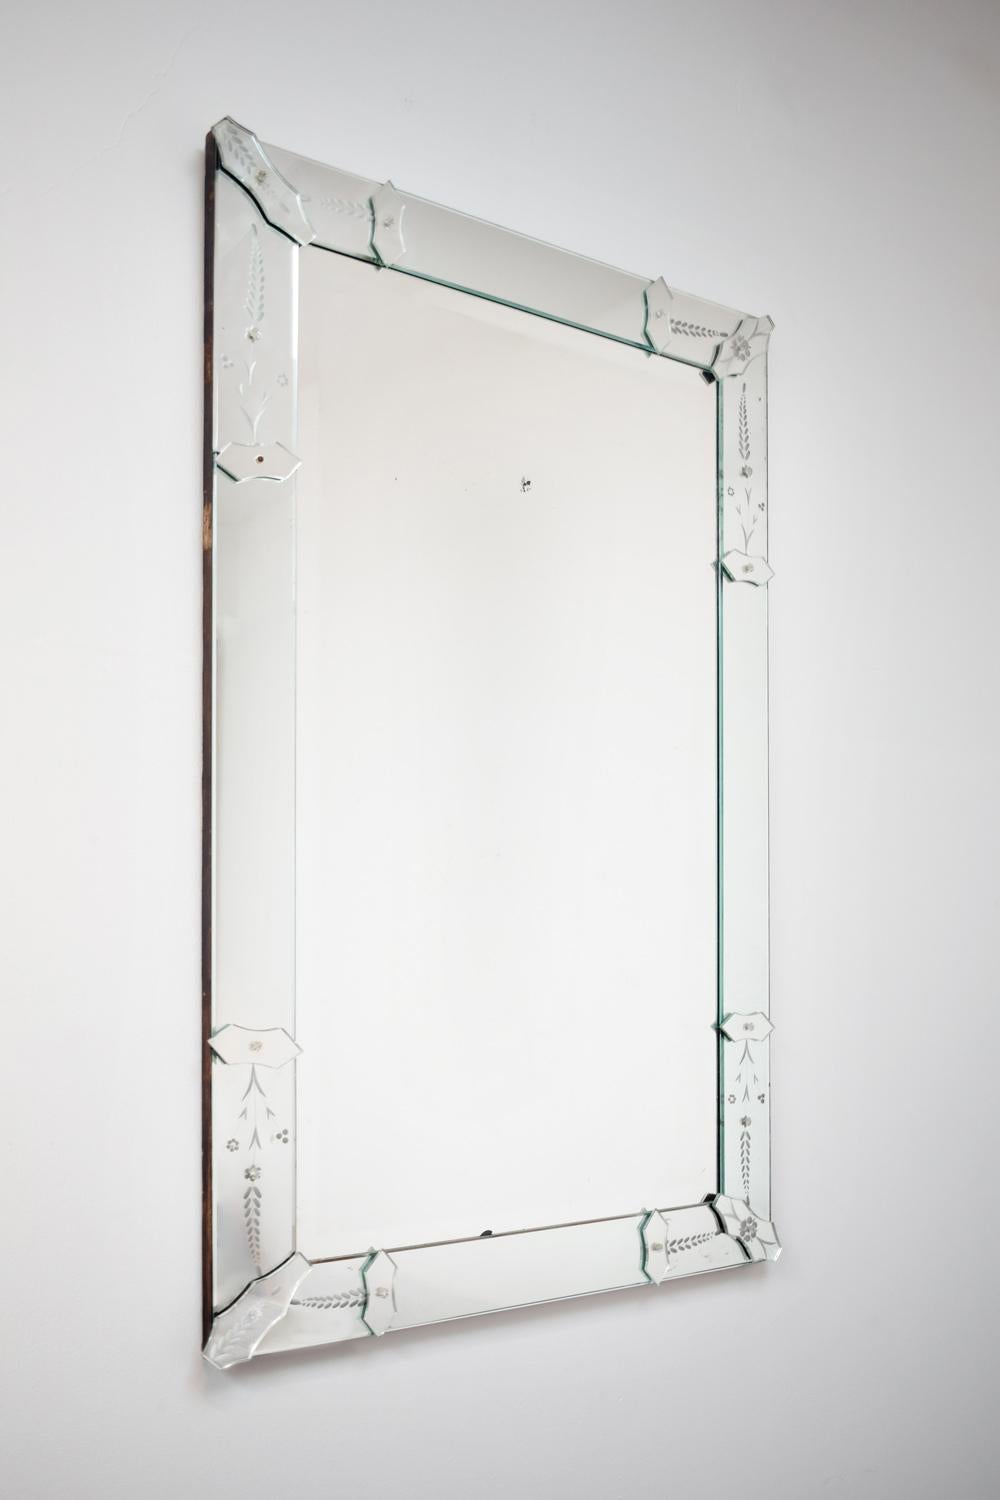 Space Age Rectangular mirror in the style of Venice, the border engraved with floral decor